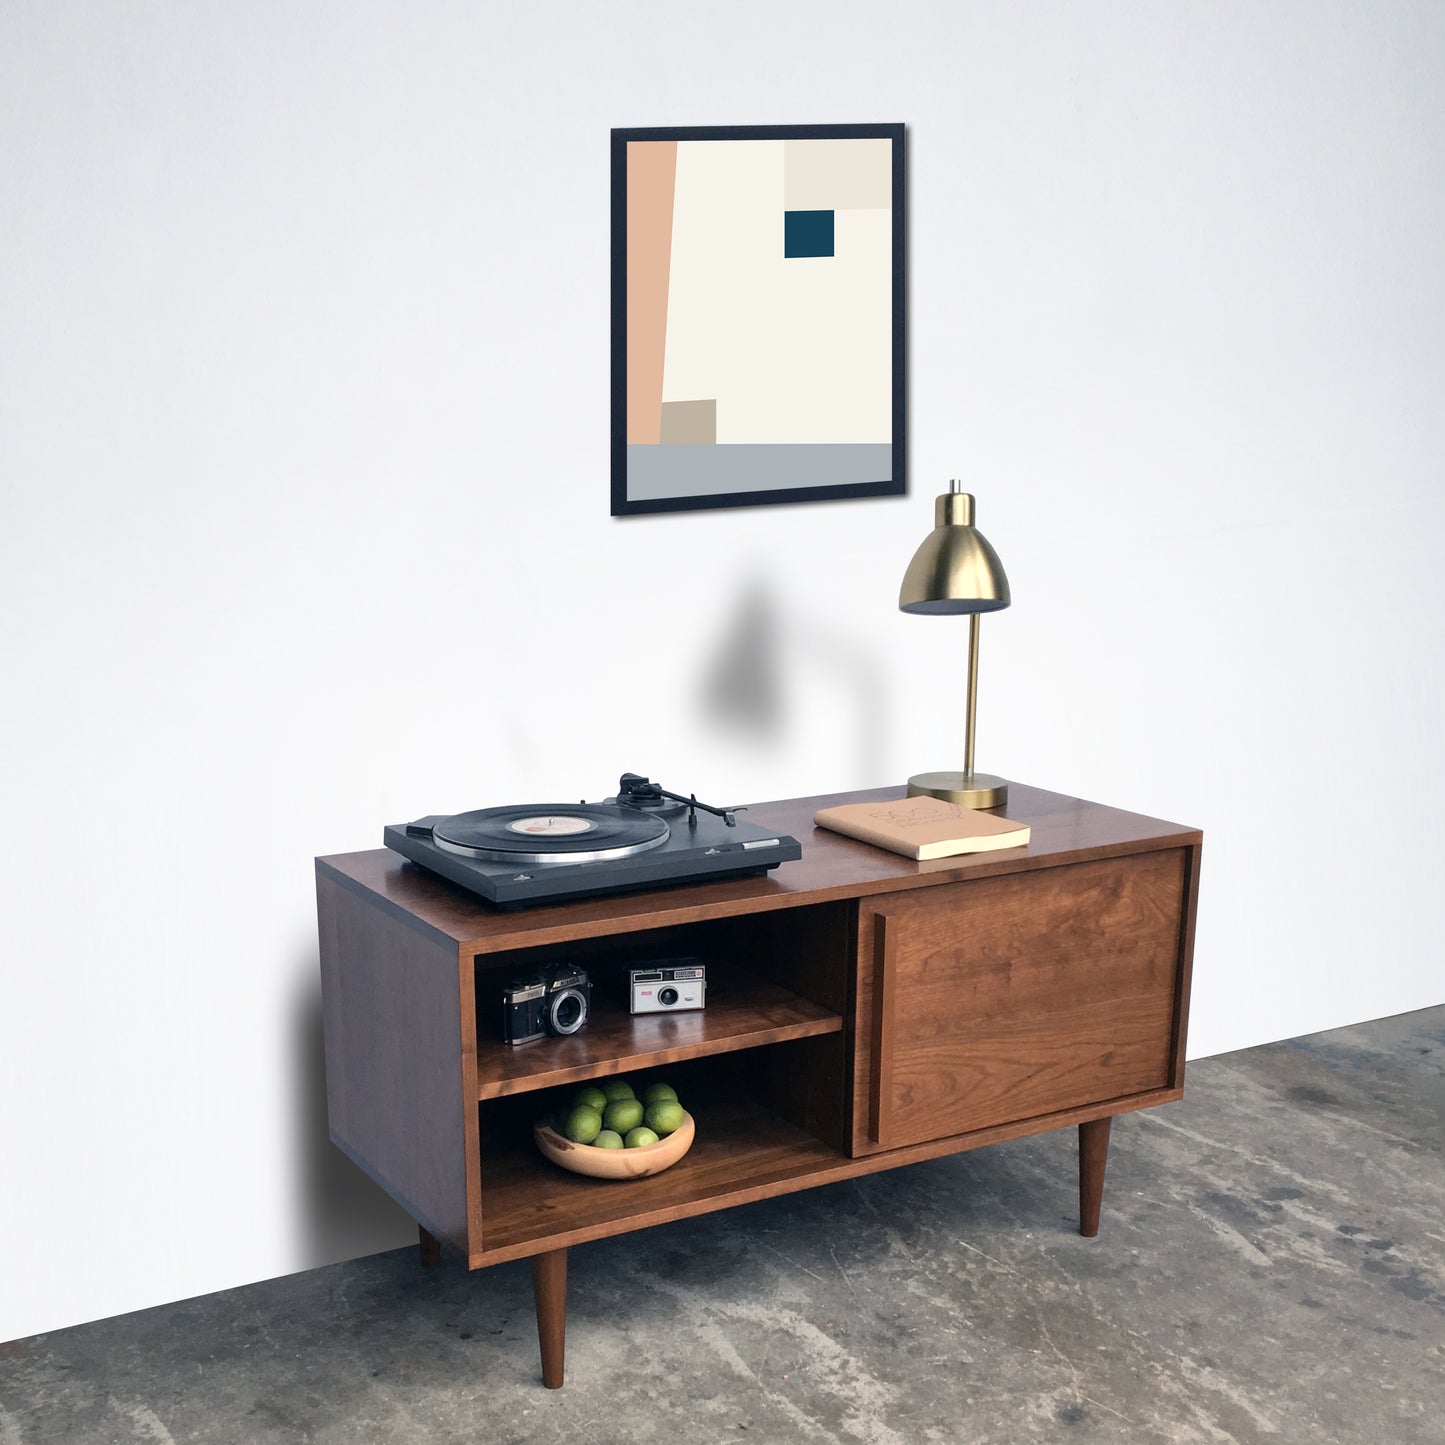 Whitewater Media Console - Record Storage - Solid Cherry - Teak Finish